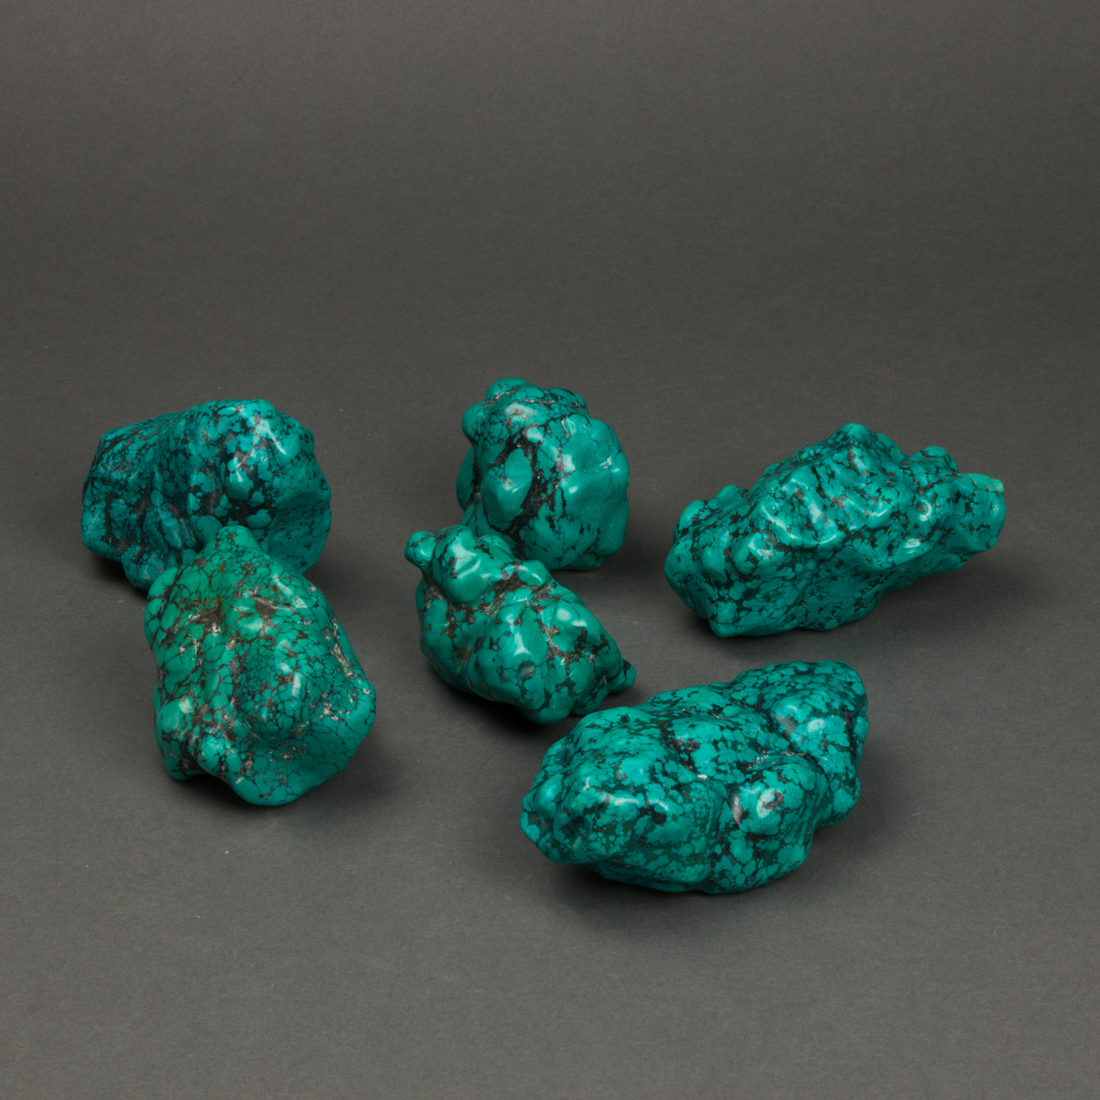 GROUP OF TURQUOISE SPECIMENS Group